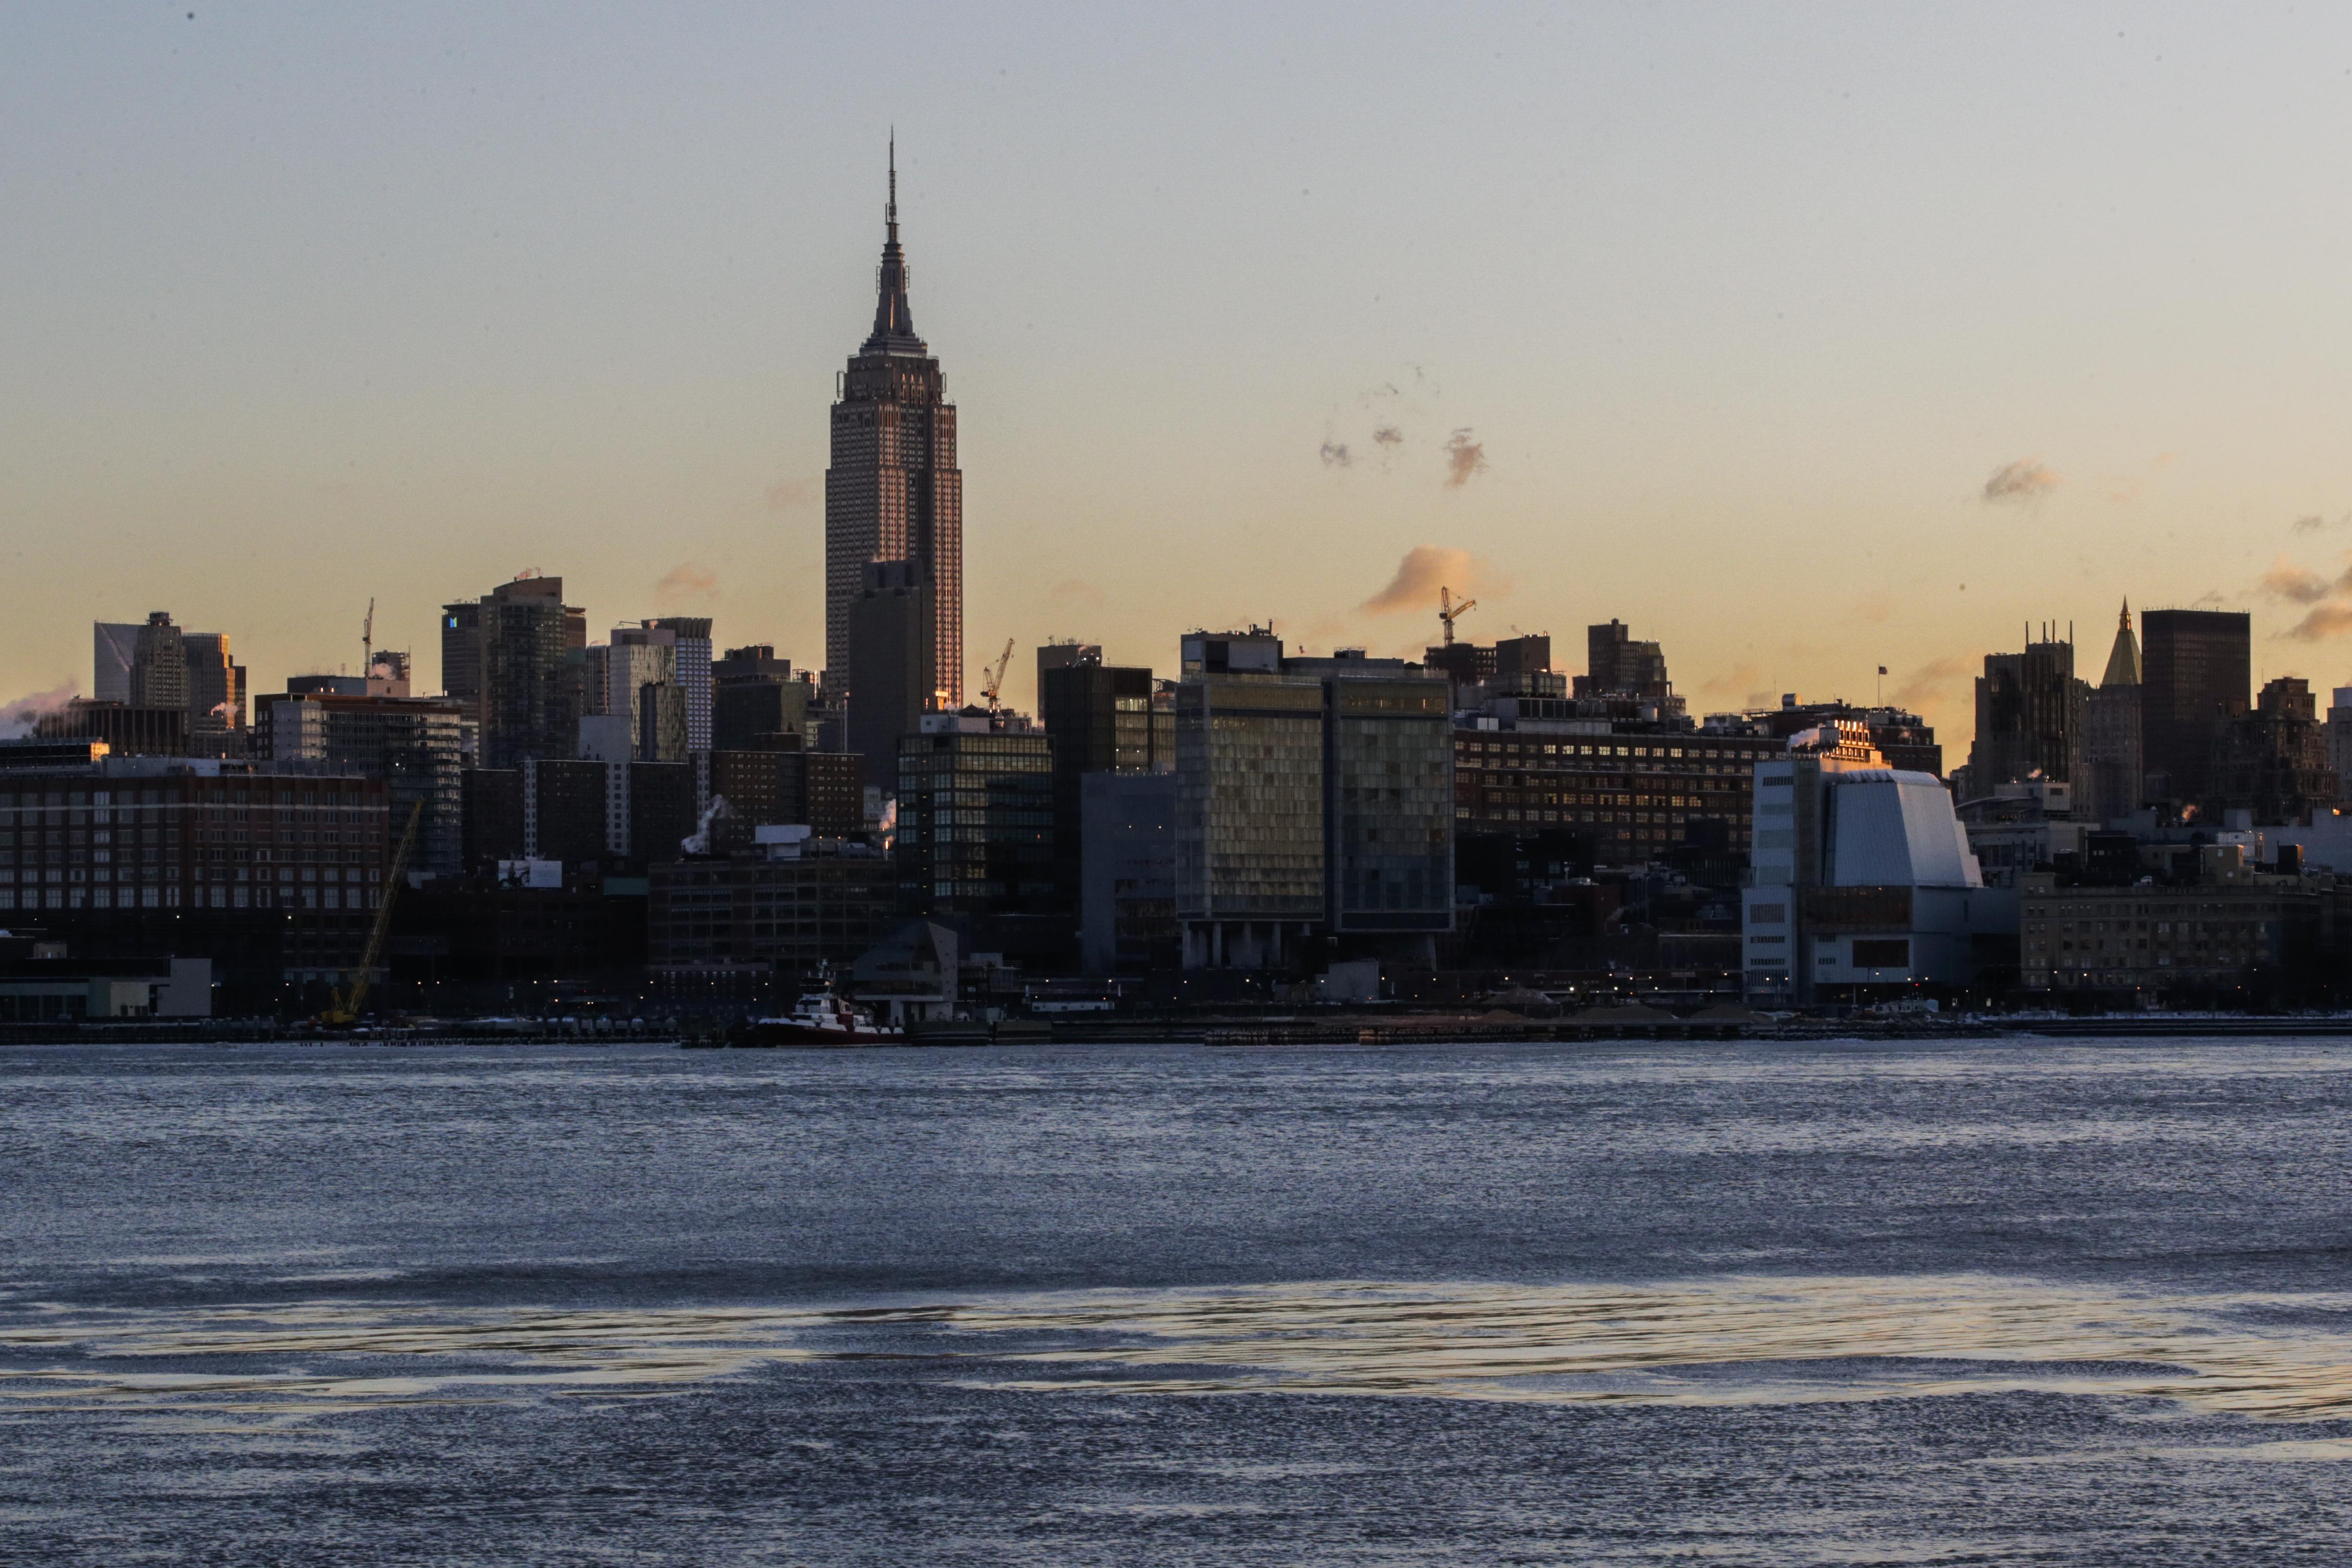  Ice floats along the Hudson River as the skyline of New York City and The Empire State Building are seen during freeze temperatures.